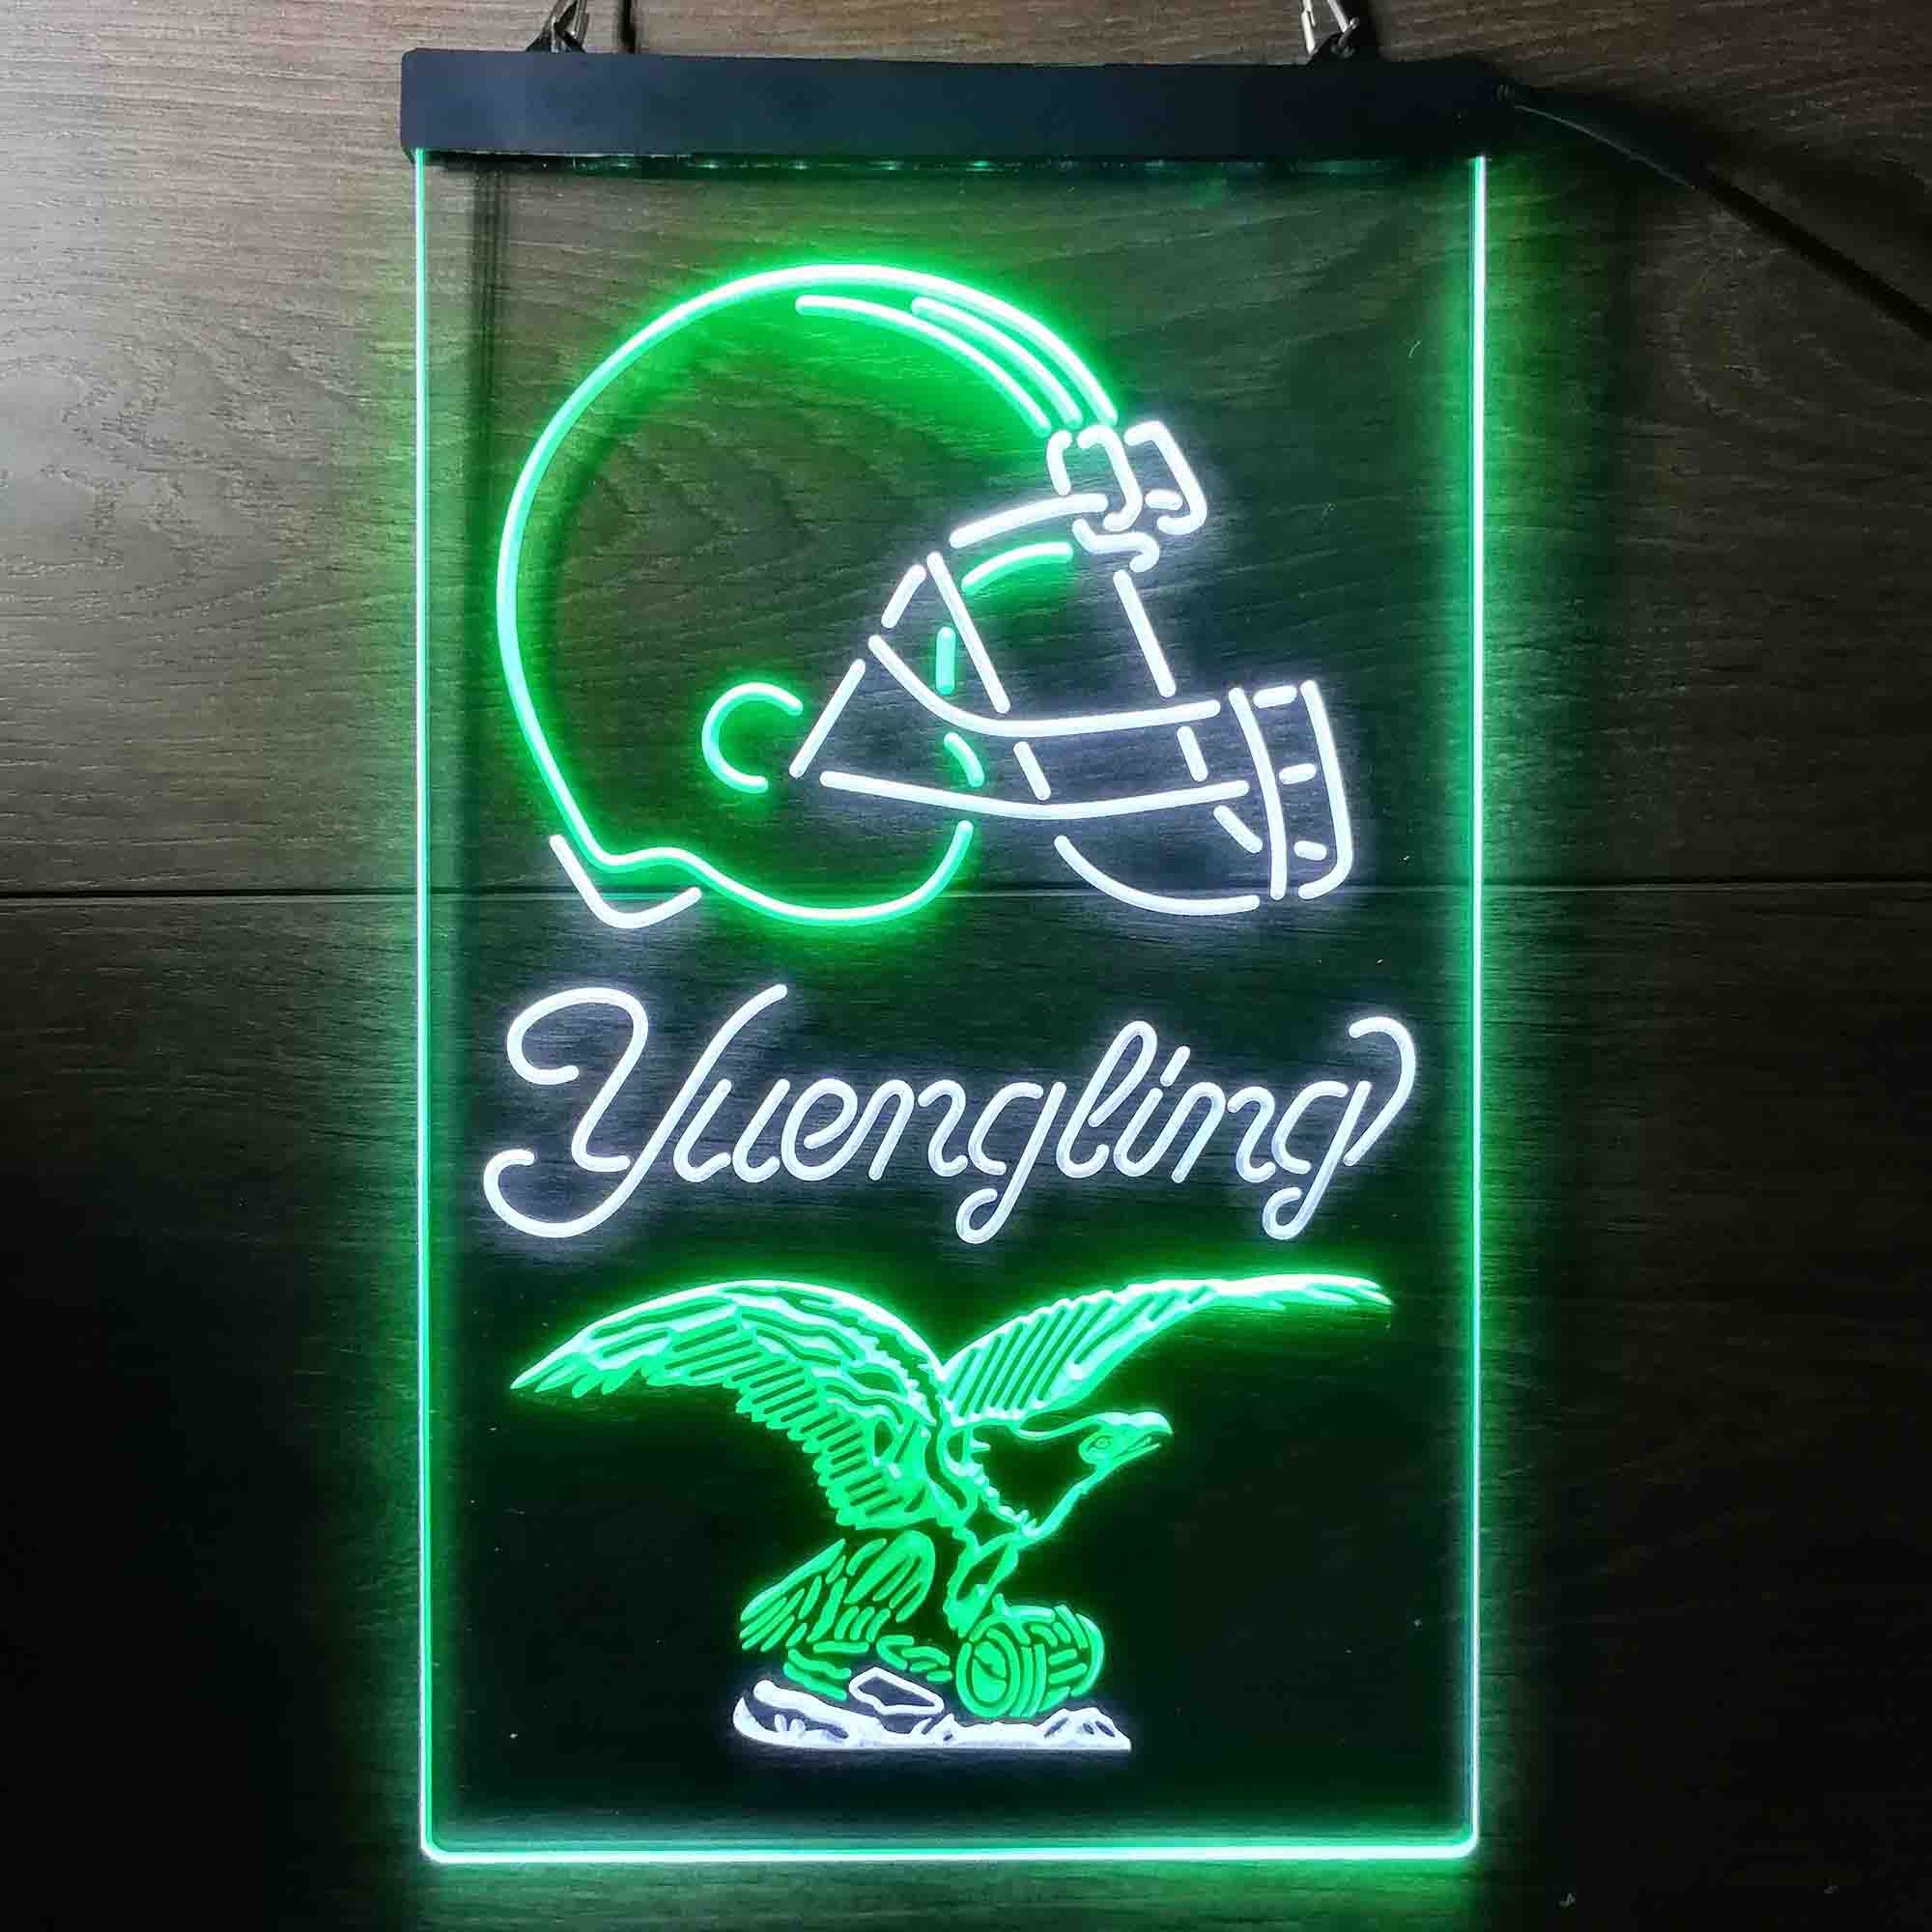 Yuengling Bar Cleveland Browns Est. 1946 Neon-Like LED Sign